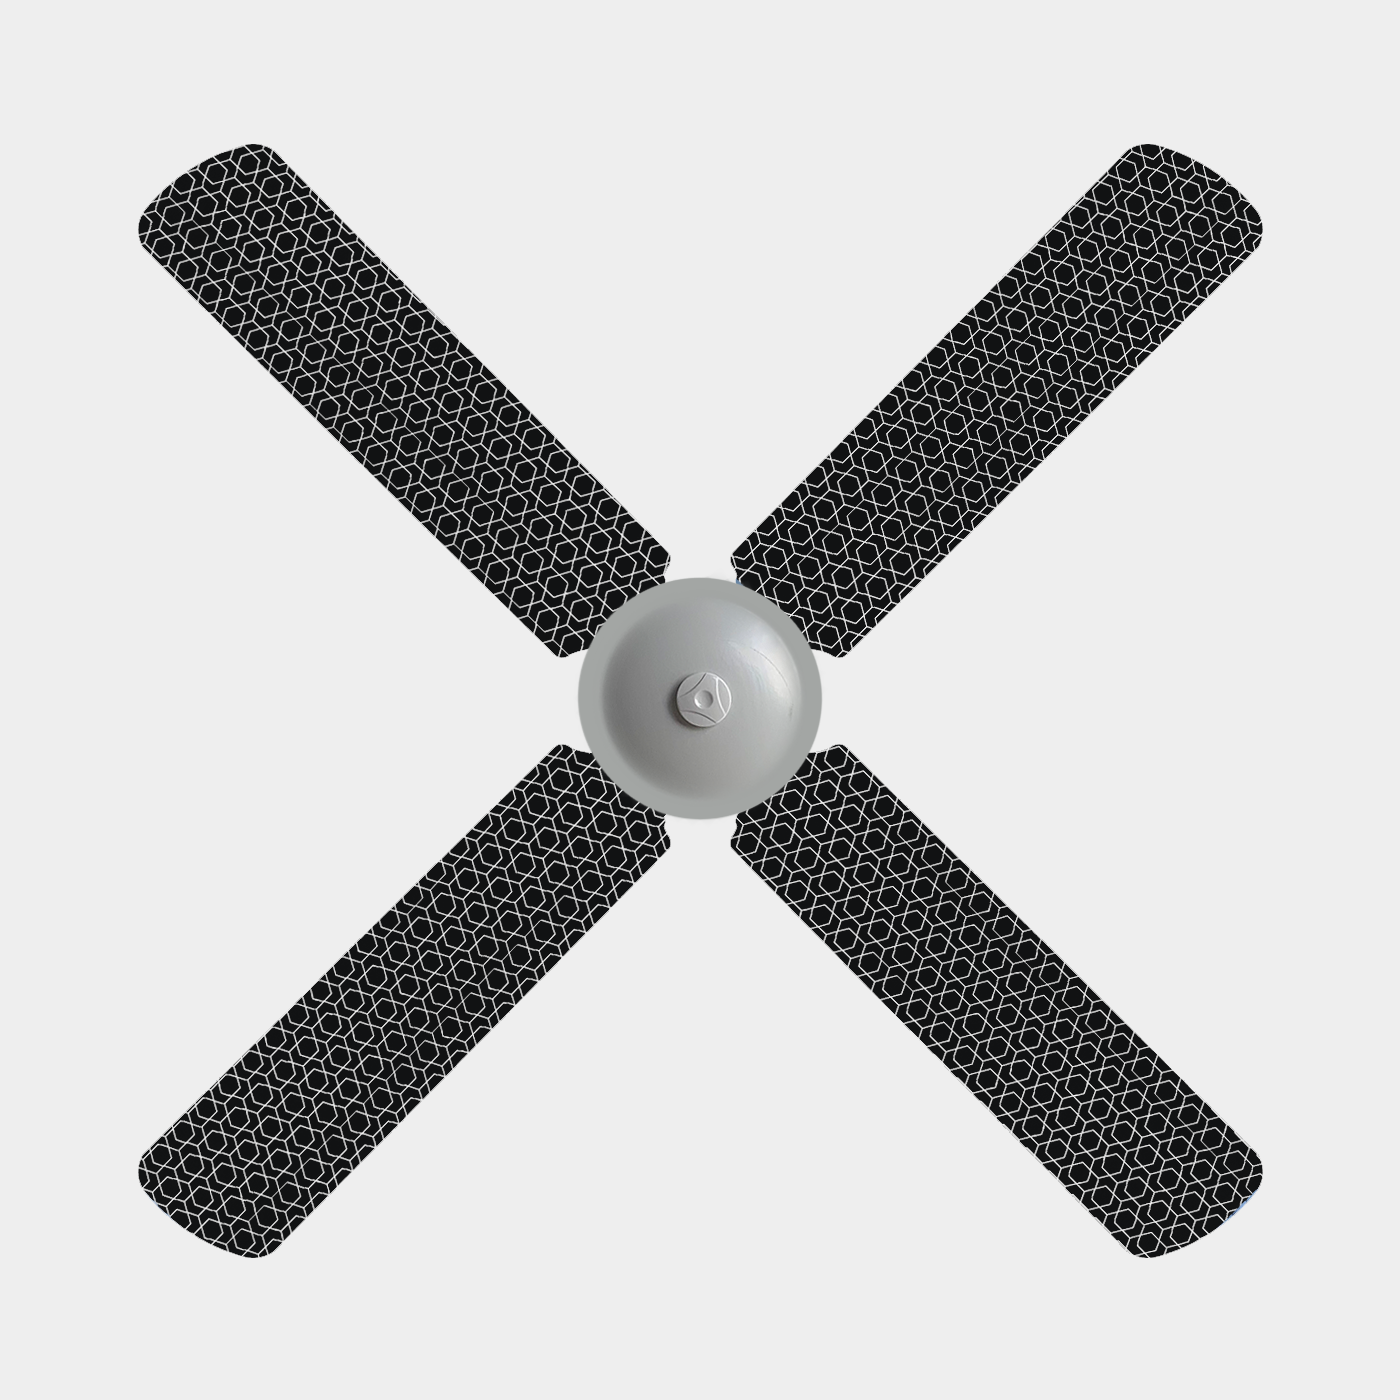 Three blade fan with covers with black background and white geometric pattern